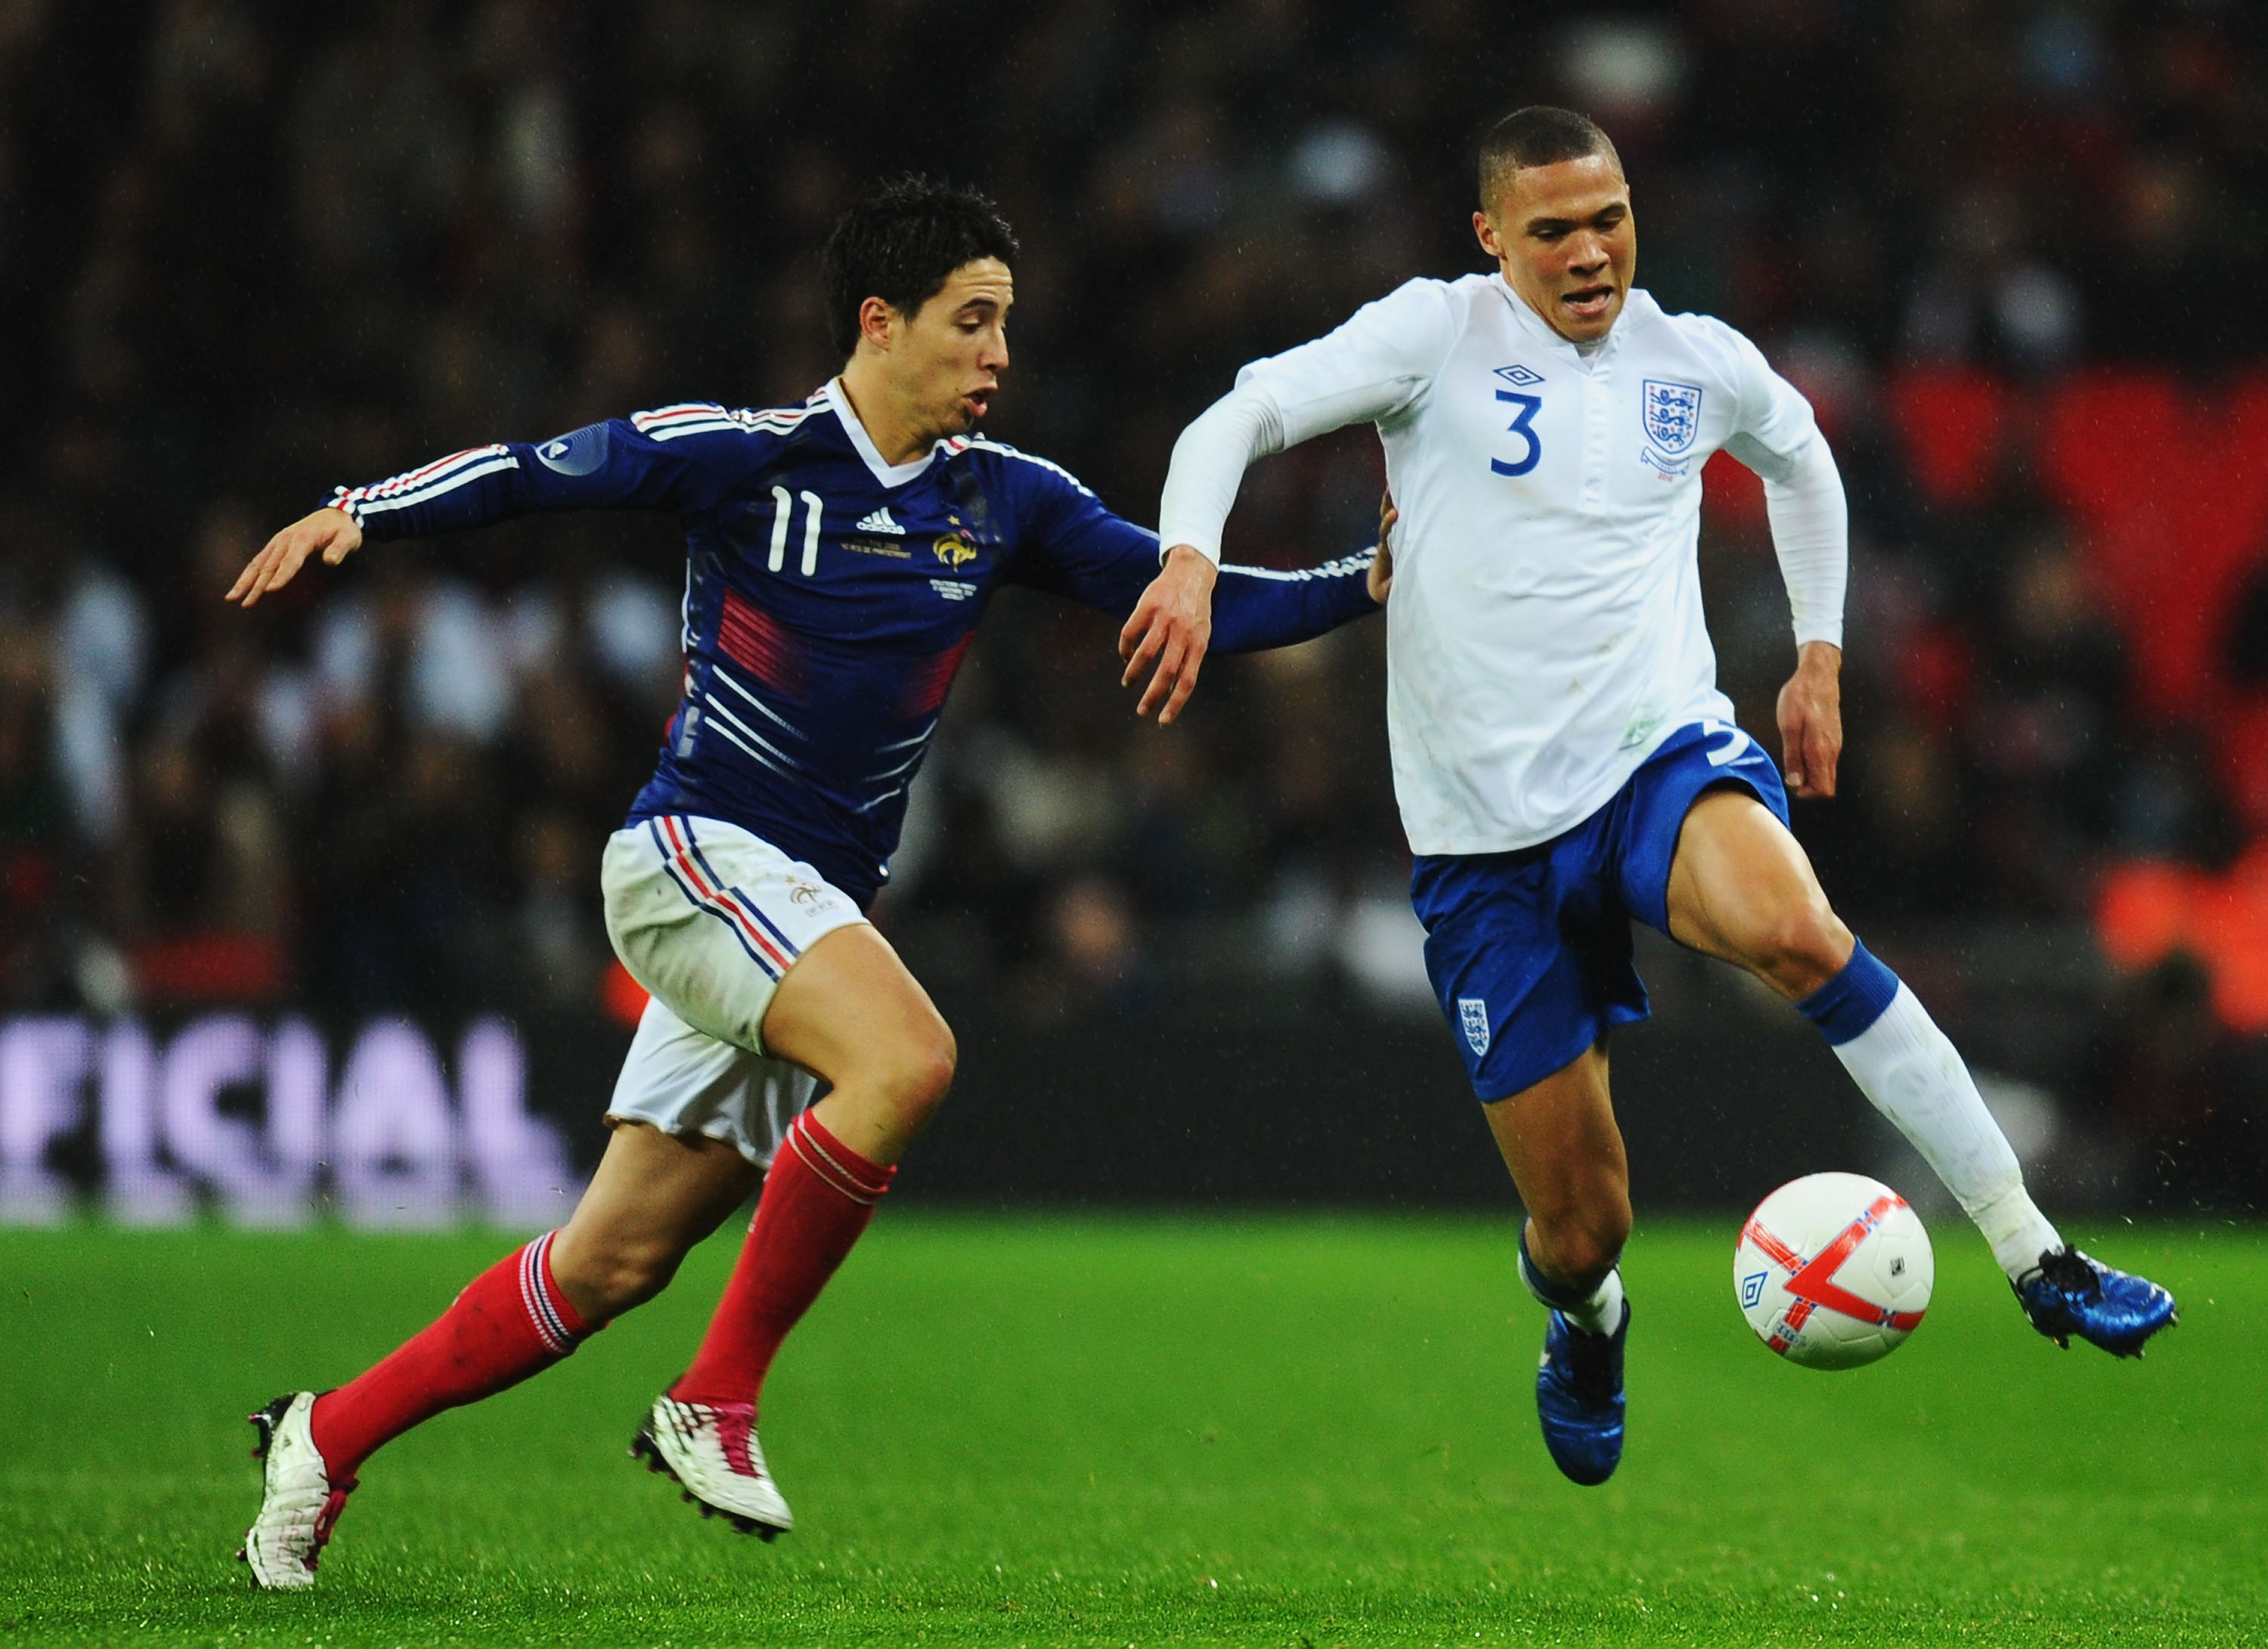 LONDON, ENGLAND - NOVEMBER 17:  Kieran Gibbs of England evades Samir Nasri of France during the international friendly match between England and France at Wembley Stadium on November 17, 2010 in London, England.  (Photo by Mike Hewitt/Getty Images)